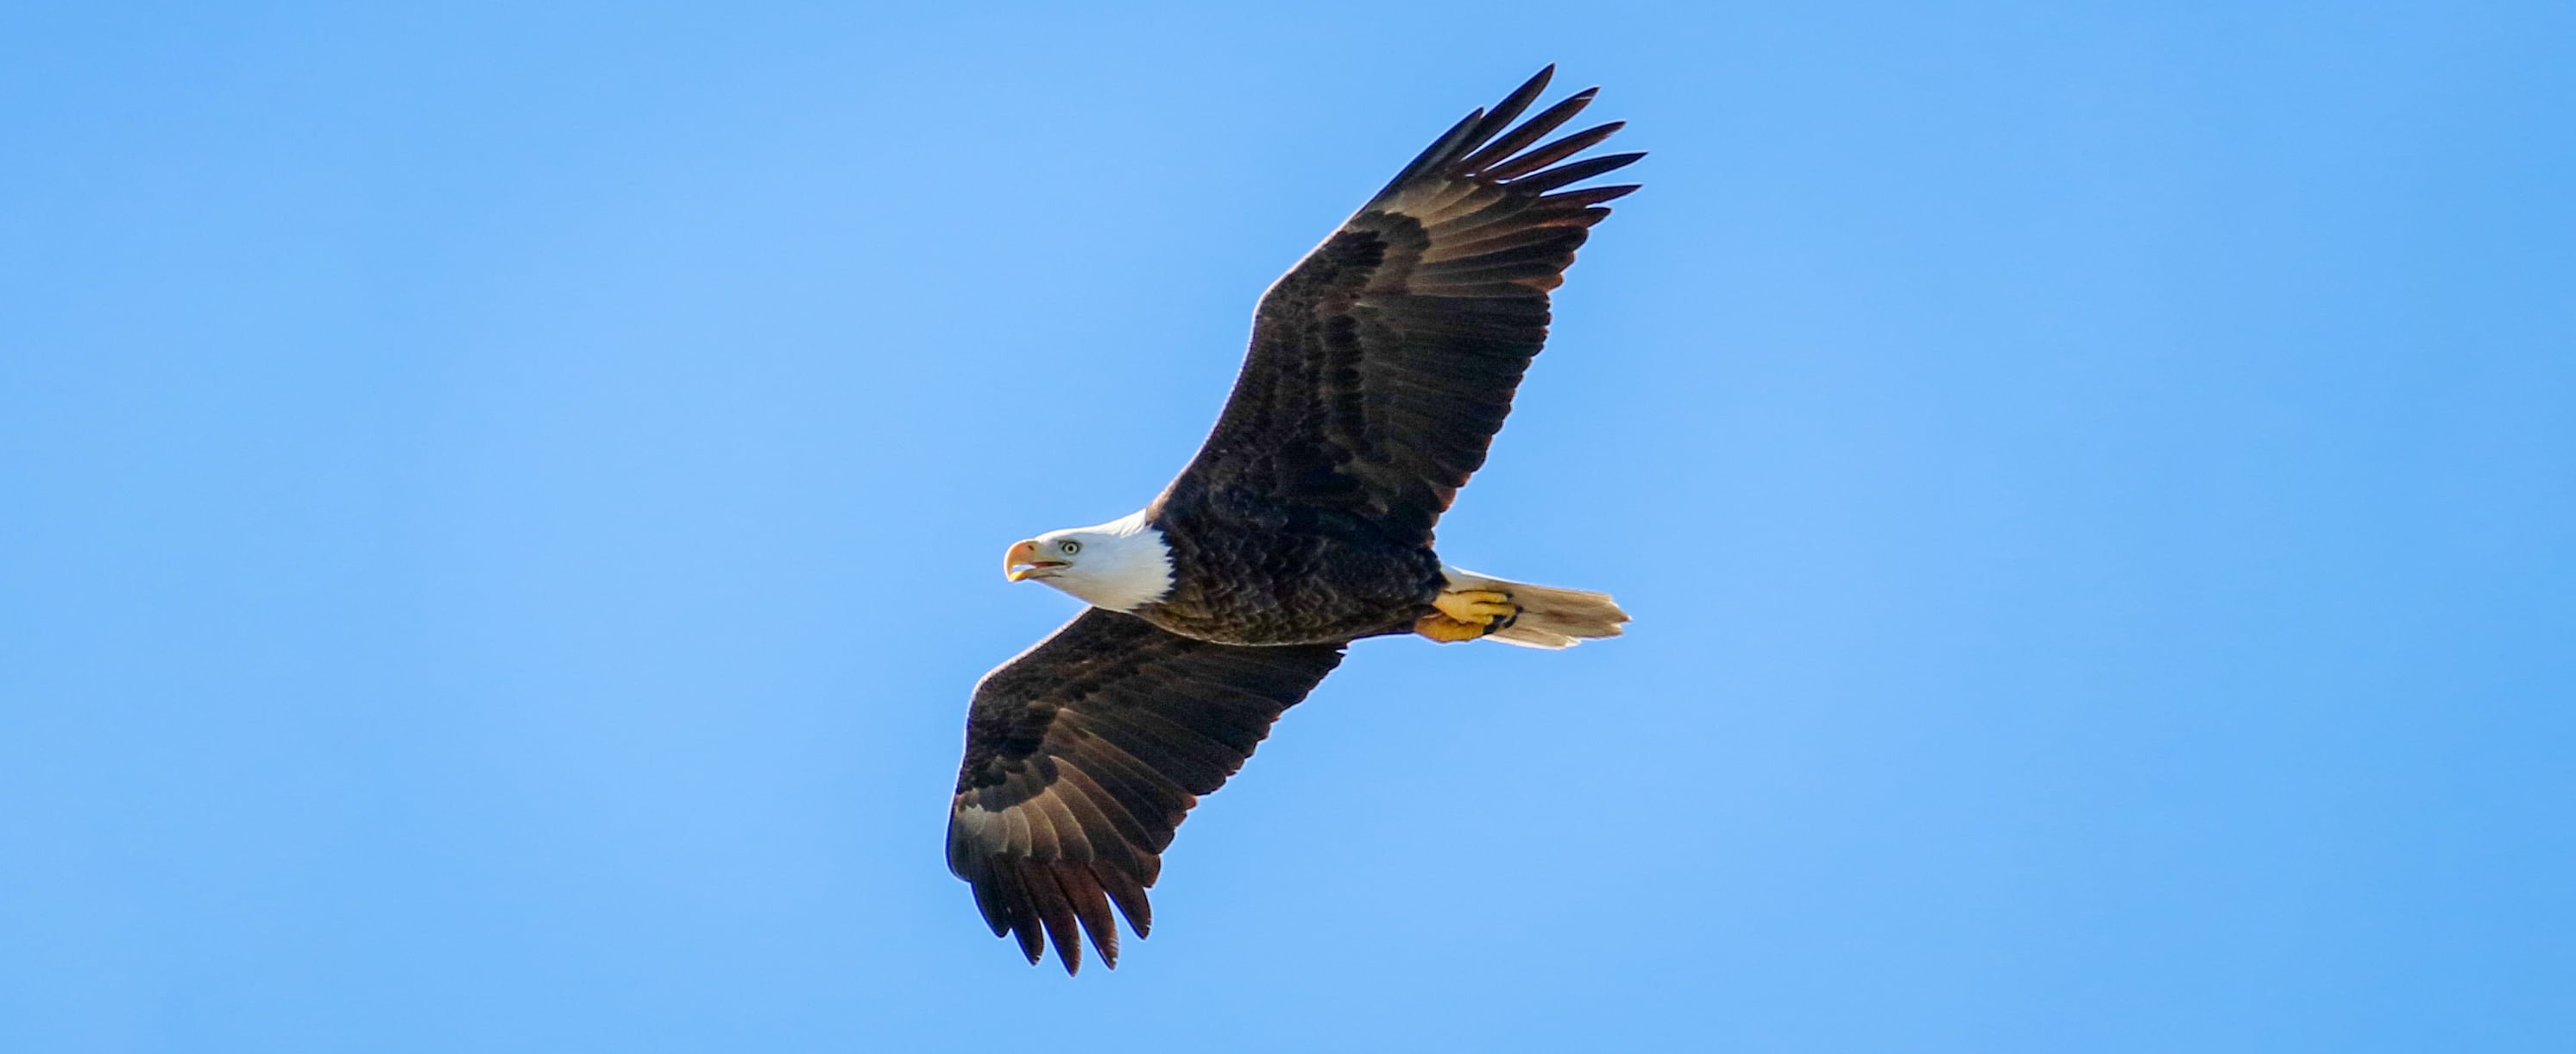 An adult bald eagle in flight with its bill open